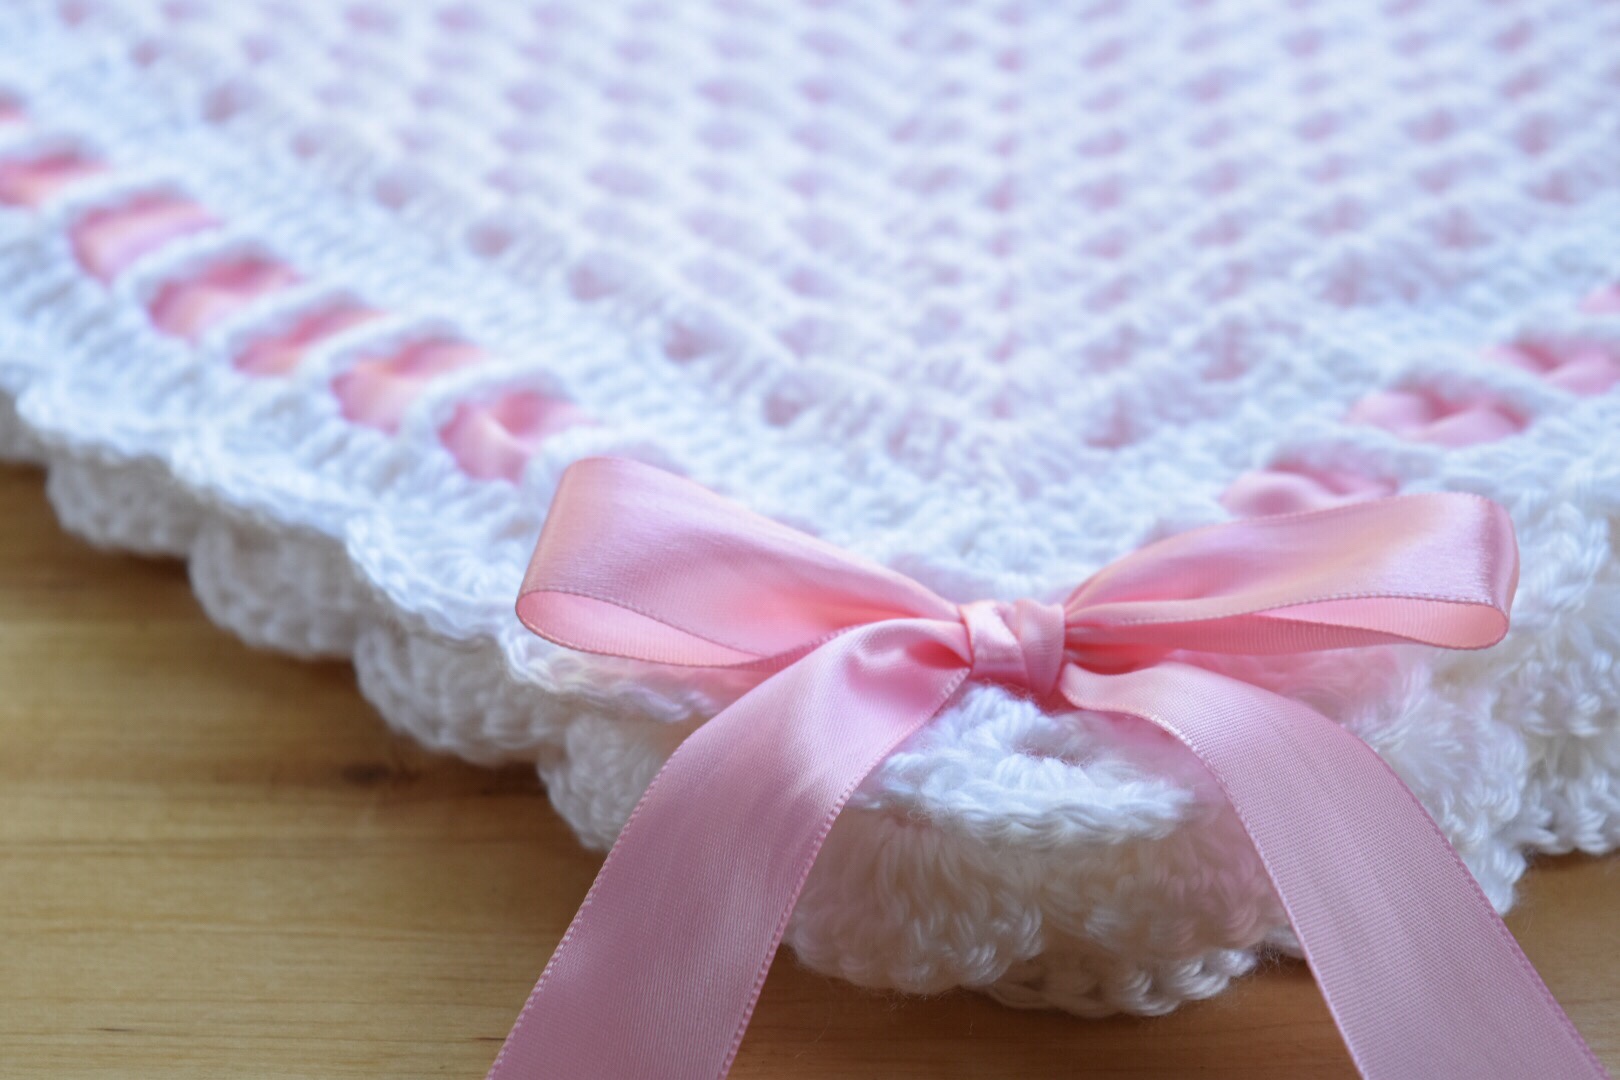 spielzeug-hand-crochet-baby-doll-blanket-with-ribbon-bow-white-lilac-purple-18-x-18-puppen